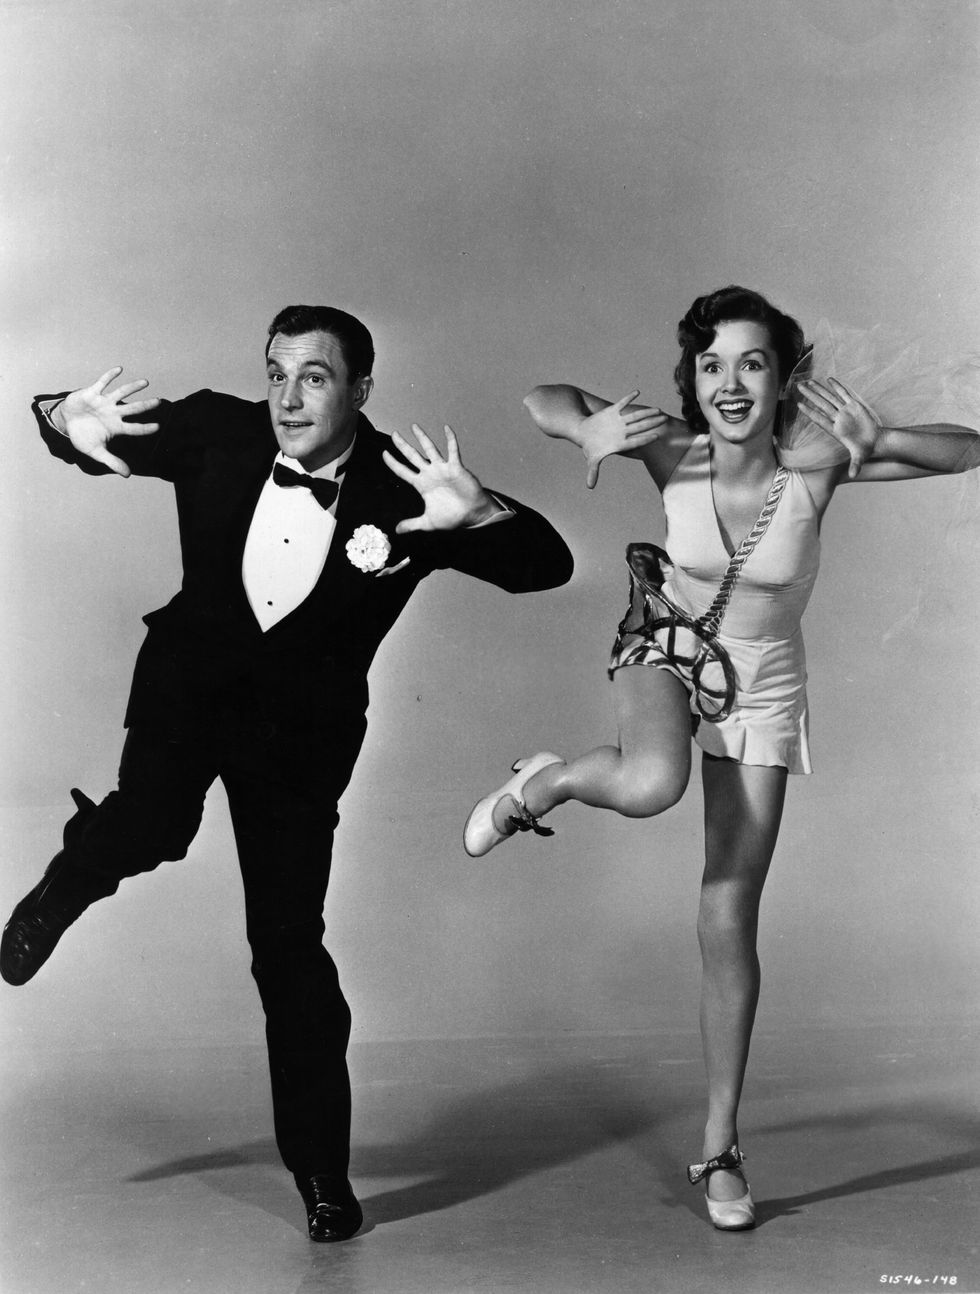 Gene Kelly: Debbie Reynolds was 18 when she starred as Gene Kelly's love interest in Singin' in the Rain. She had never sung or danced before, but she said learned a lot from Kelly whom she has described 'as the most exacting director I ever worked for.' (Photo by Hulton Archive/Getty Images)